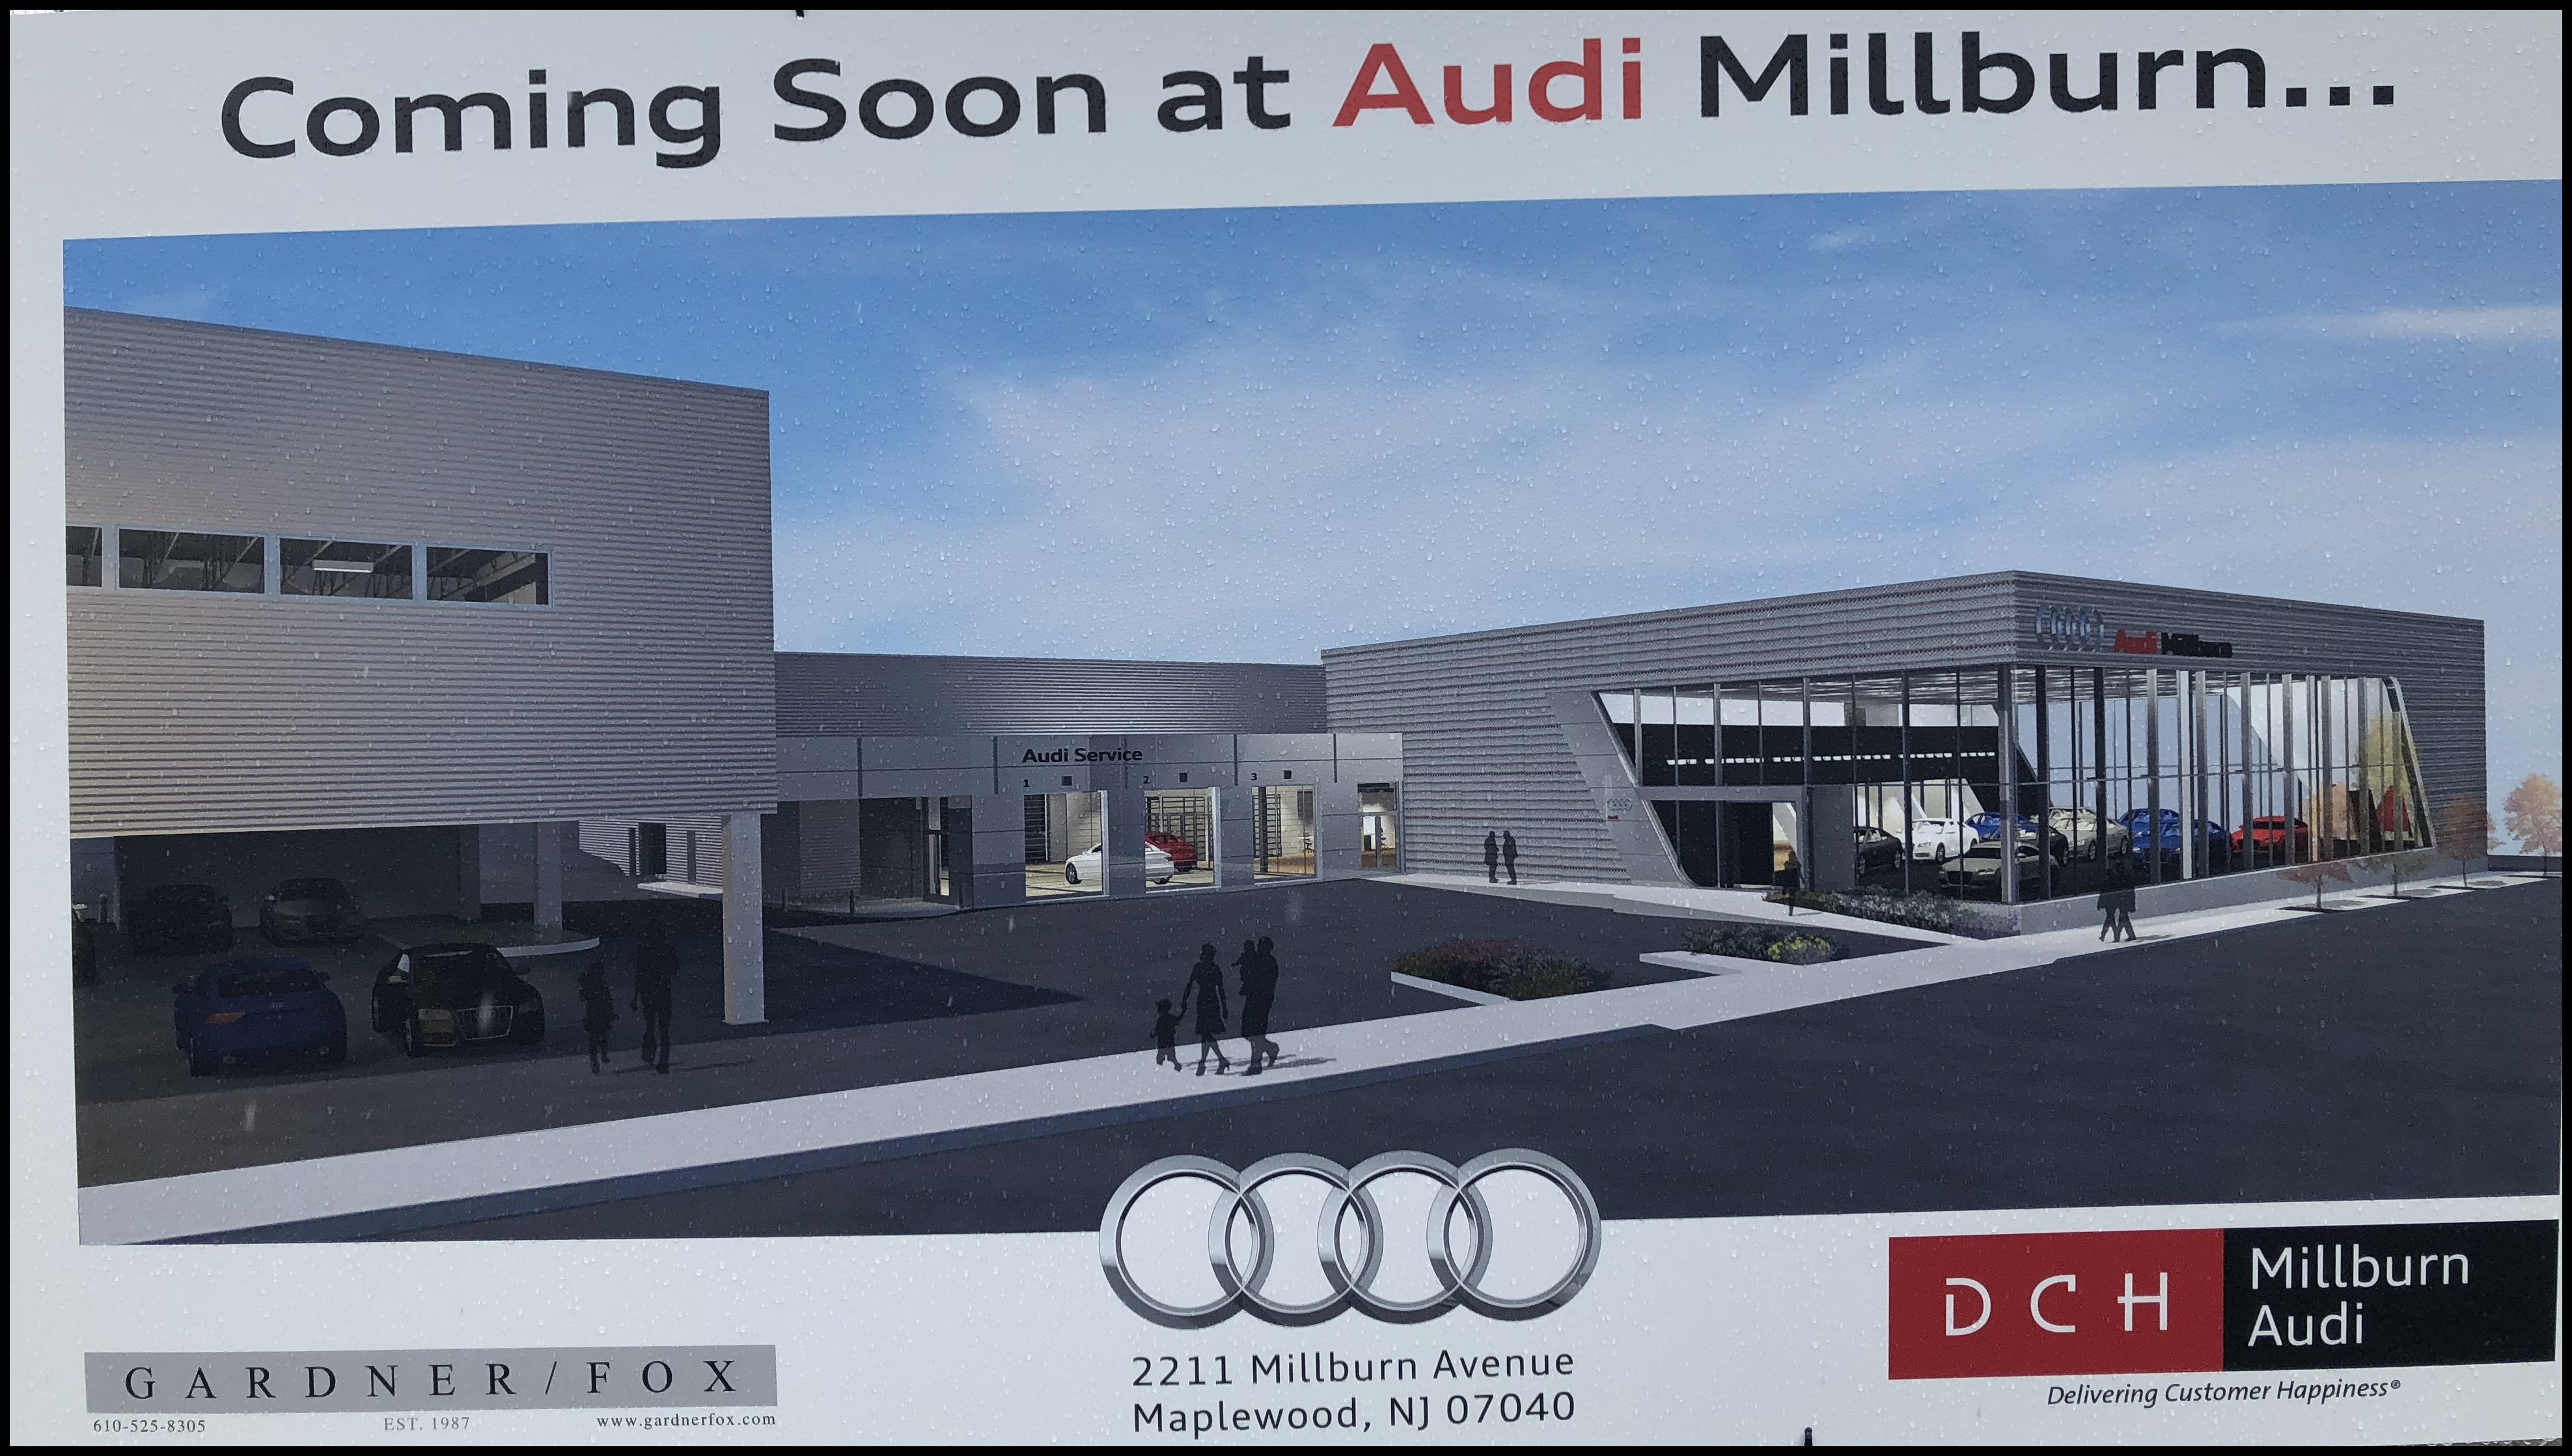 Tolerico noted that Audi has massively increased U S sales in the past 20 years — due to dealerships like DCH Audi Millburn